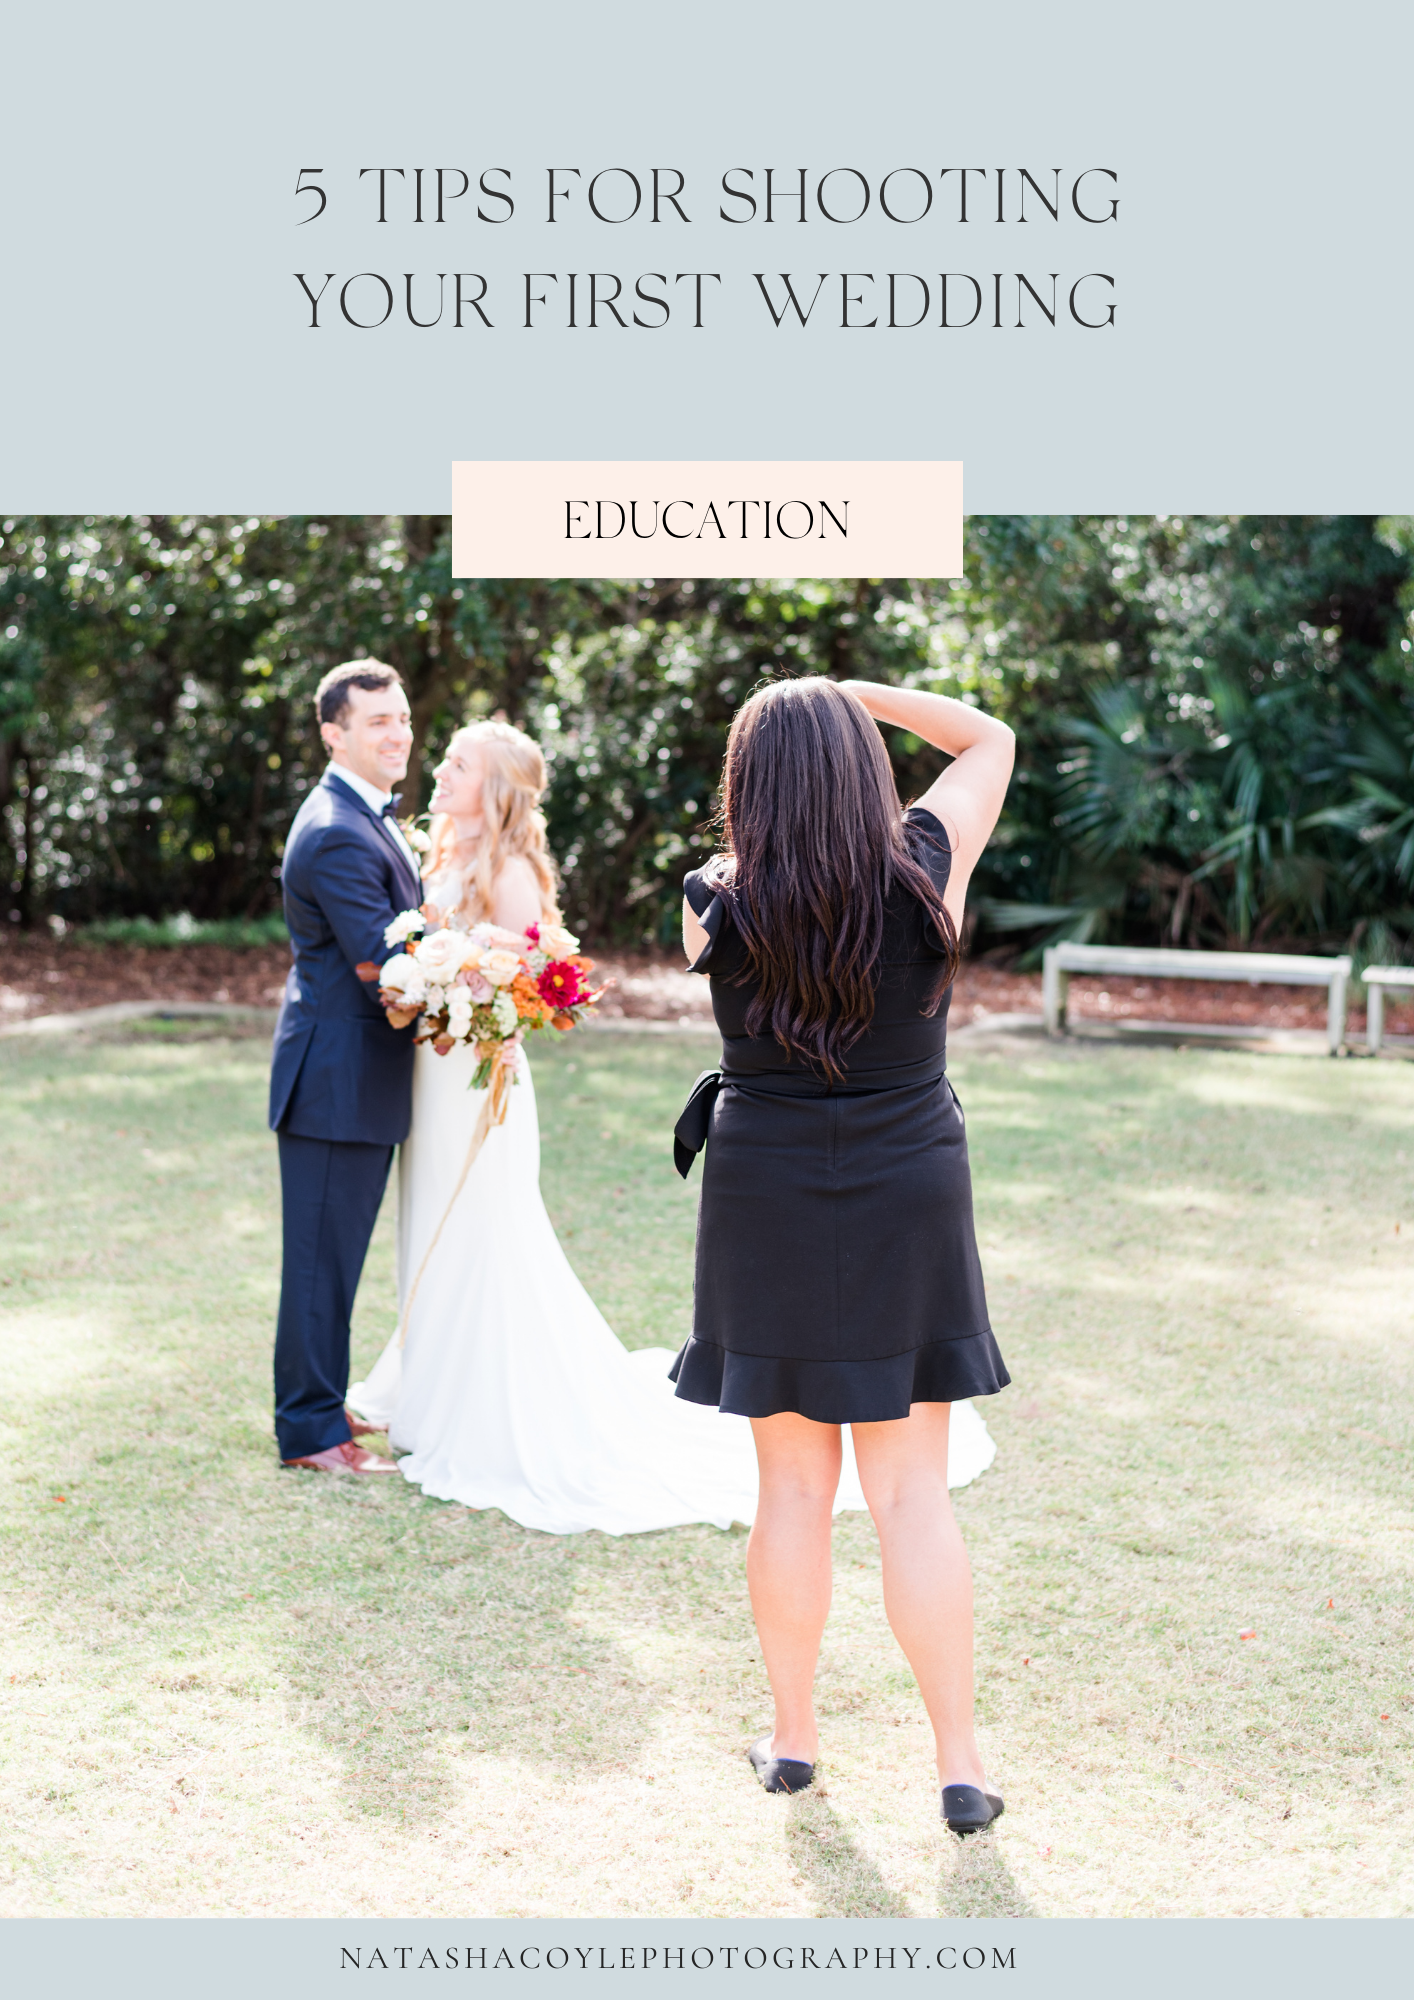 5 tips for shooting your first wedding for new photographers shared by Charleston photographer and educator Natasha Coyle